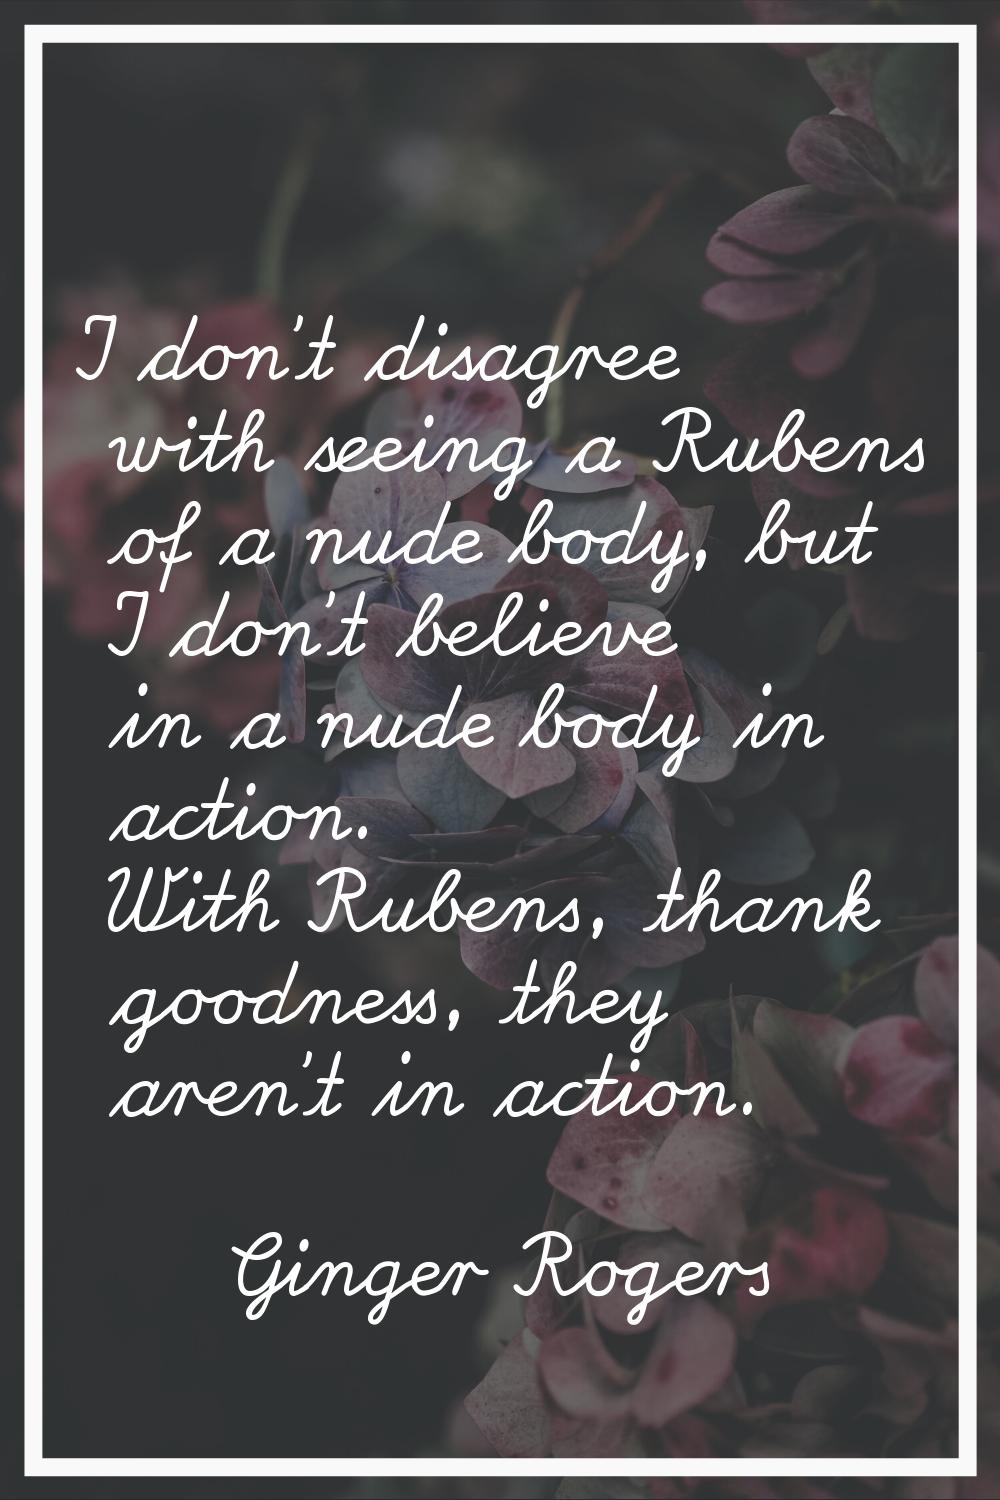 I don't disagree with seeing a Rubens of a nude body, but I don't believe in a nude body in action.